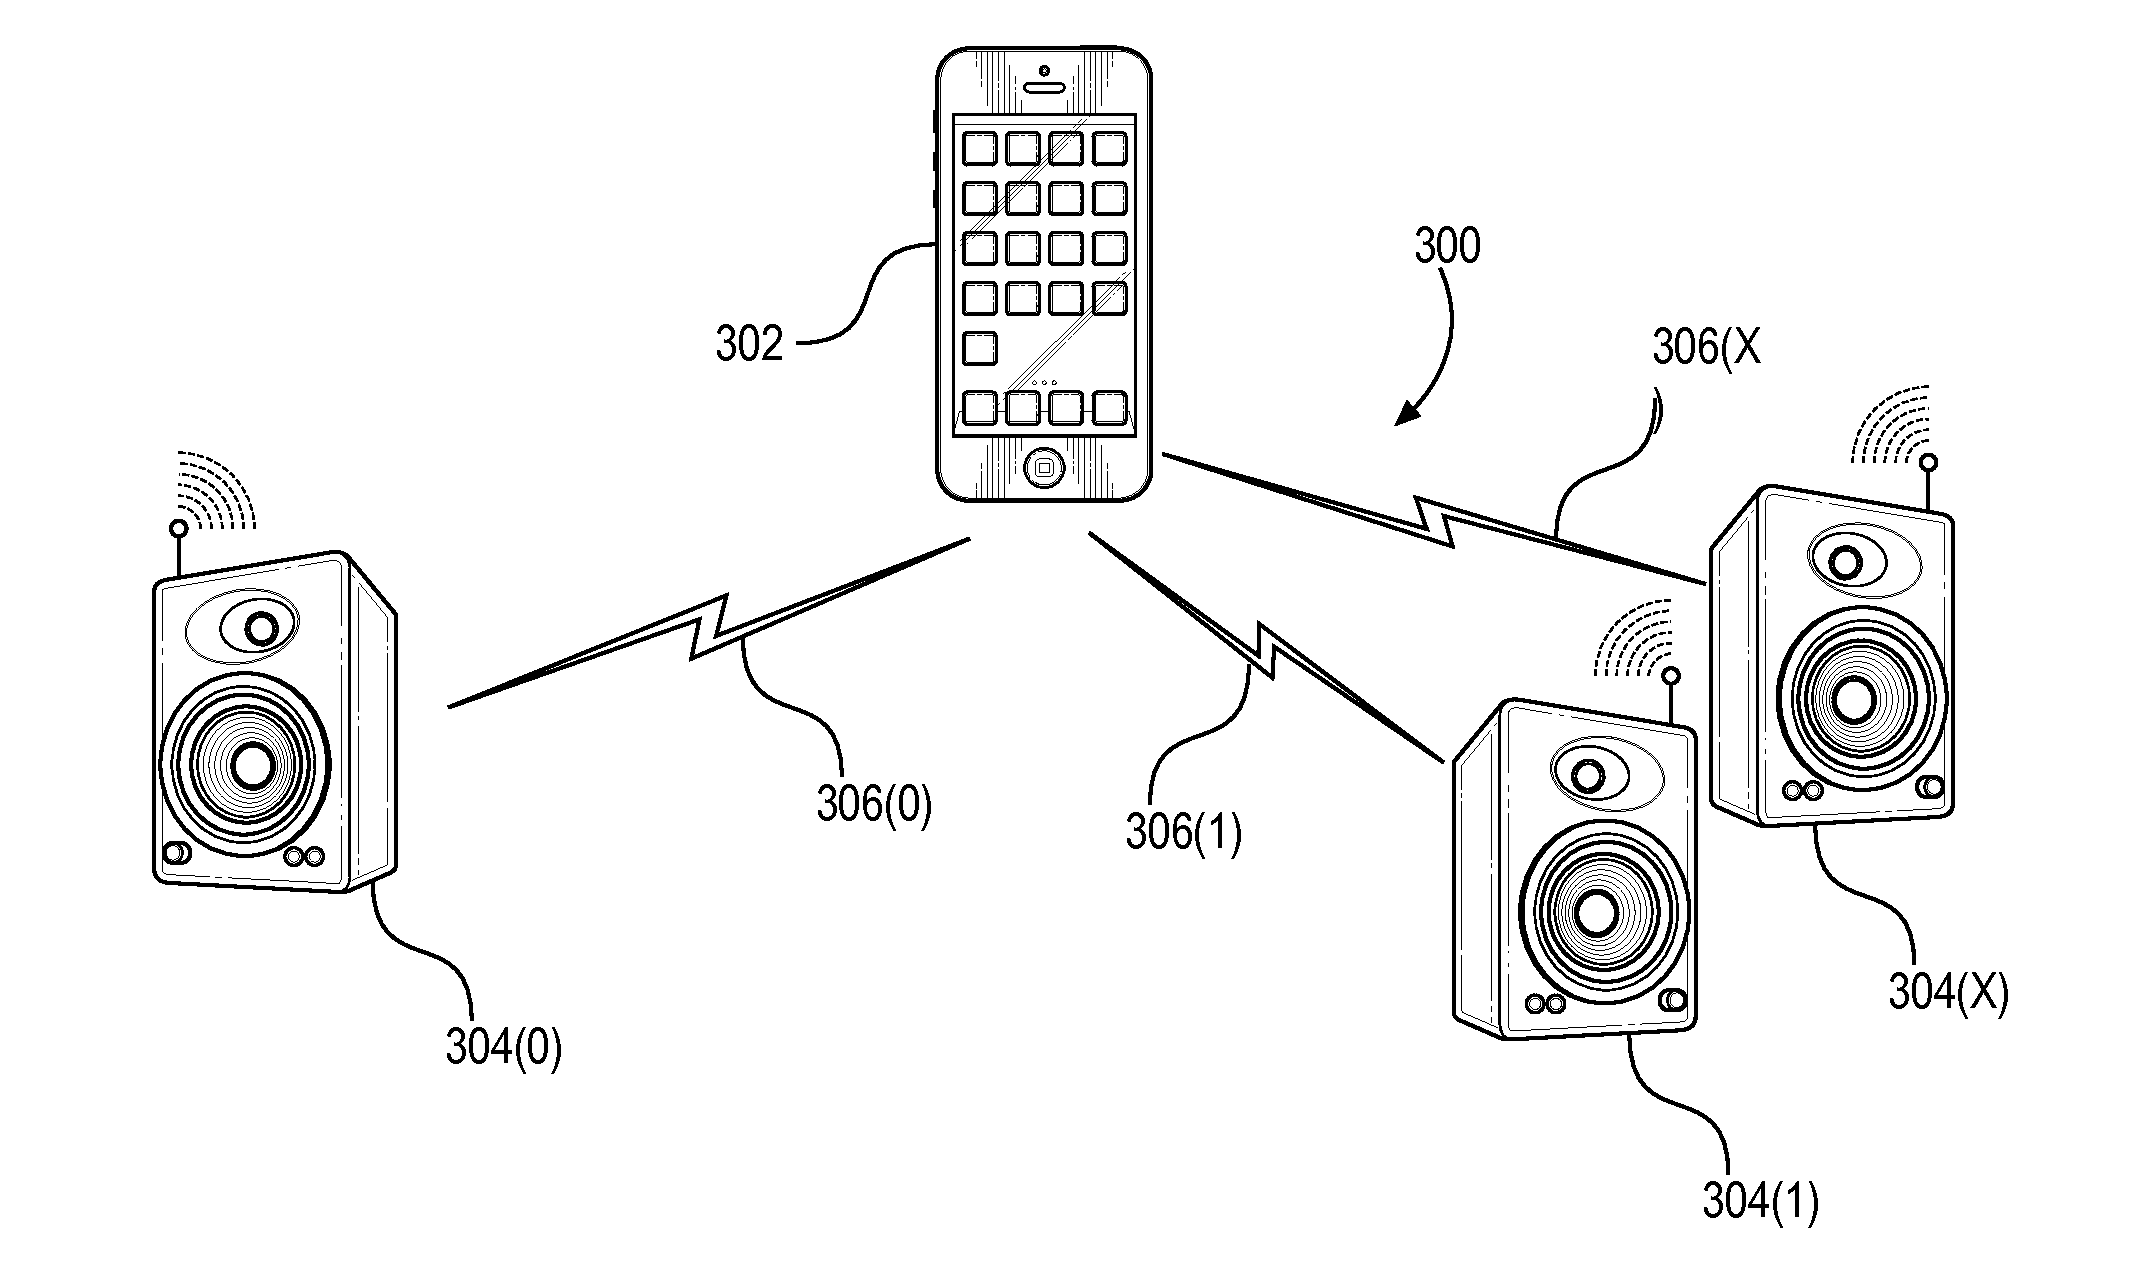 Apparatuses and methods for wireless synchronization of multiple multimedia devices using a common timing framework